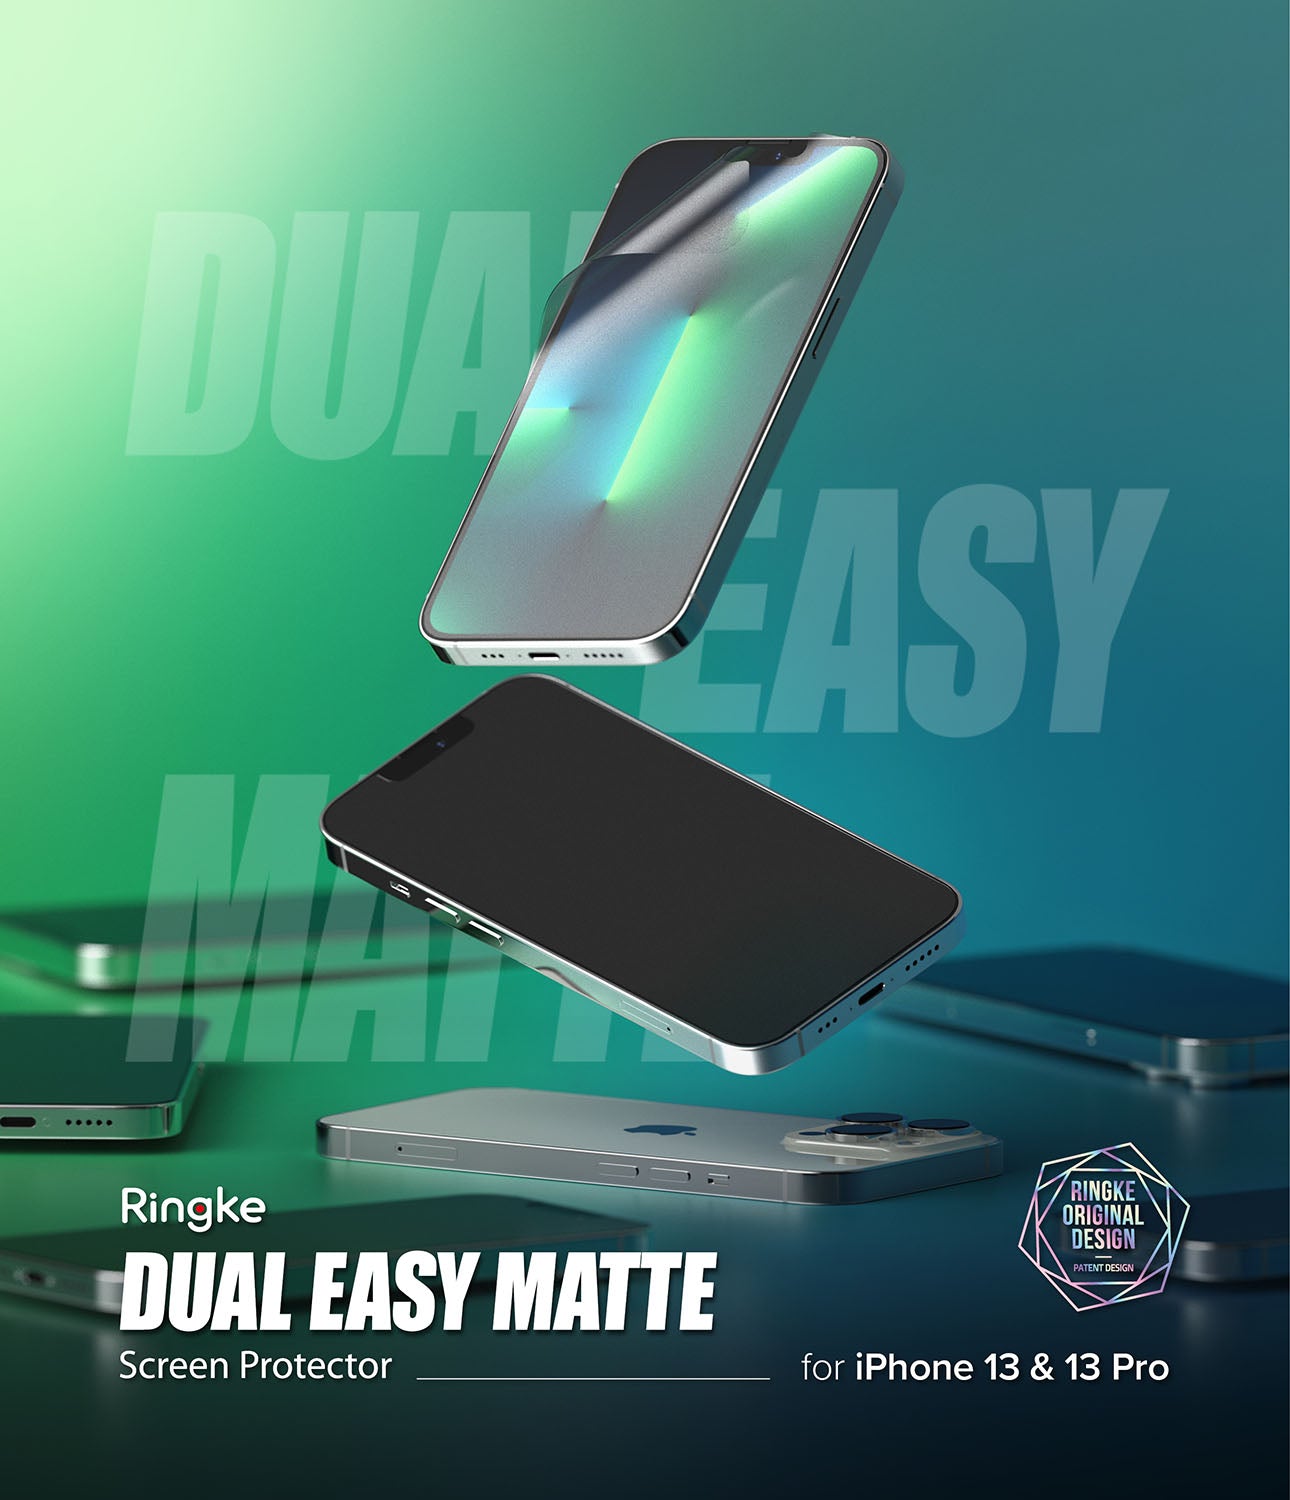 Apple iPhone 13 / Apple iPhone 13 Pro Screen Protector| Dual Easy Matte| 2 Pack